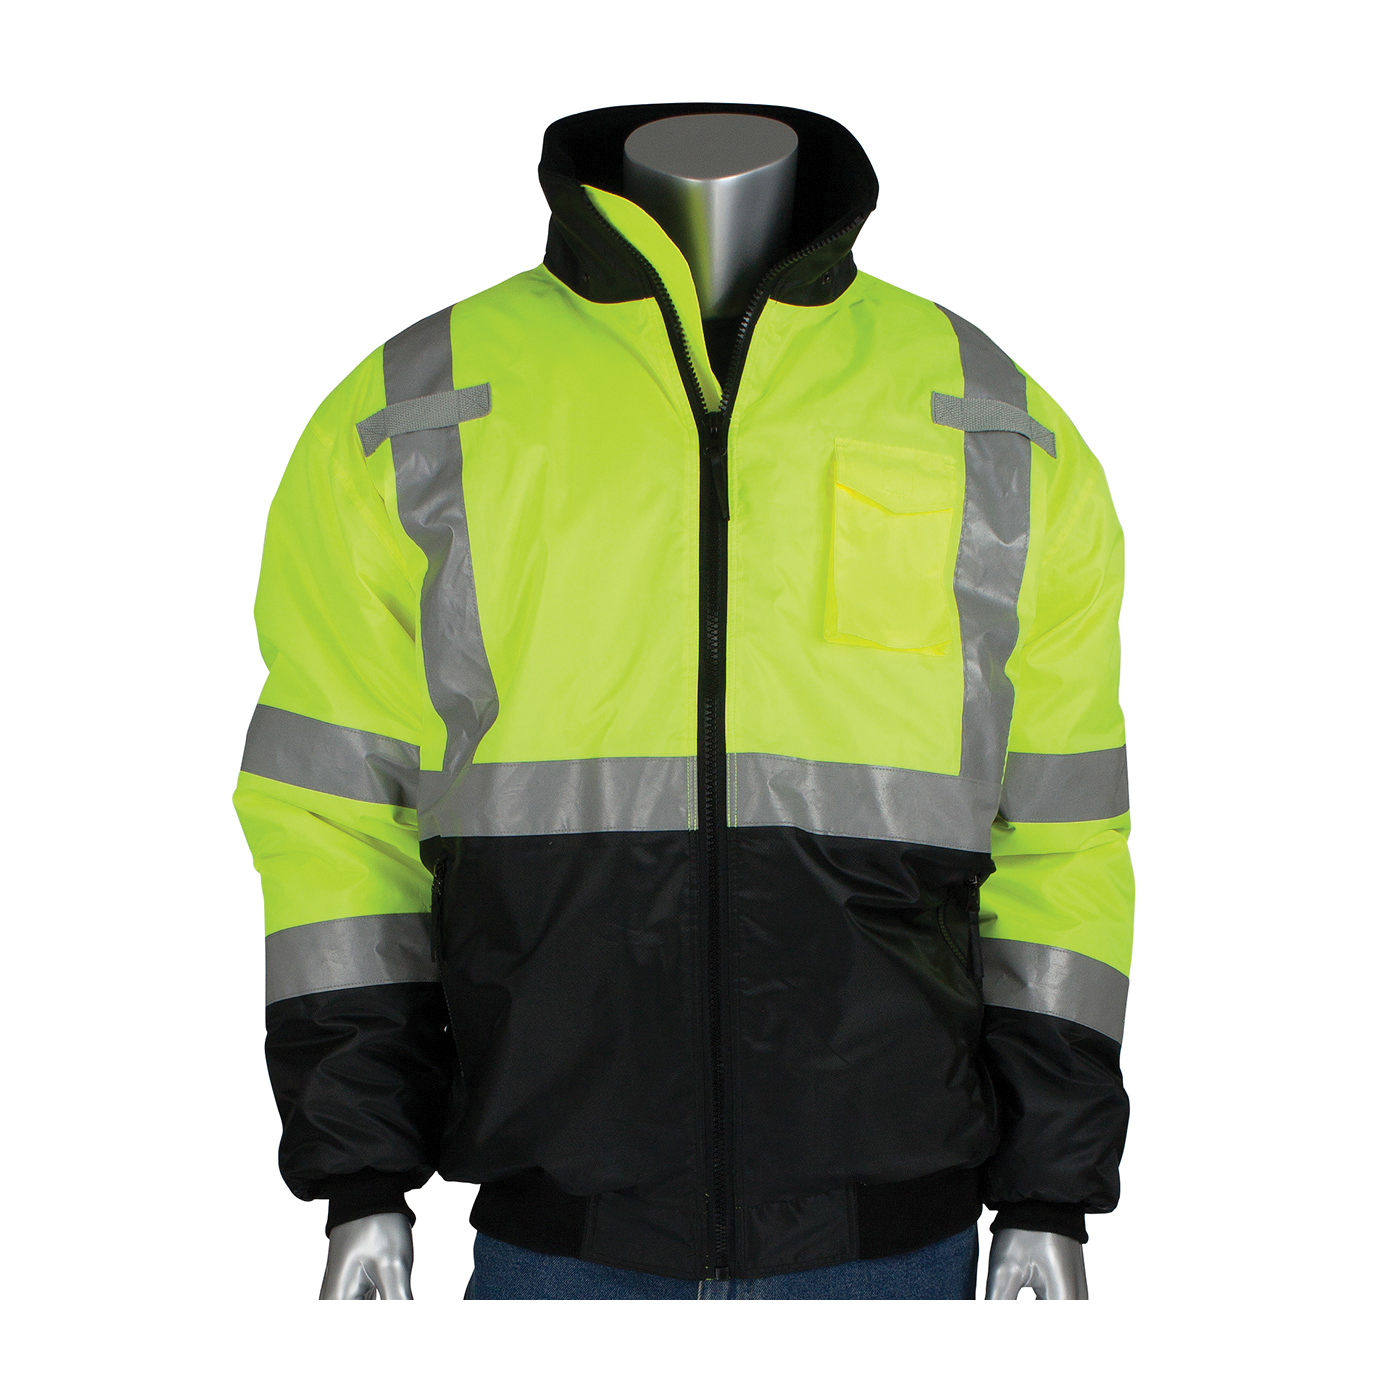 PIP® 333-1740-LY/M Bomber Jacket, Black/Hi-Viz Lime Yellow, Polyester, 54 in Chest, Resists: Water, ANSI Type R Class 3